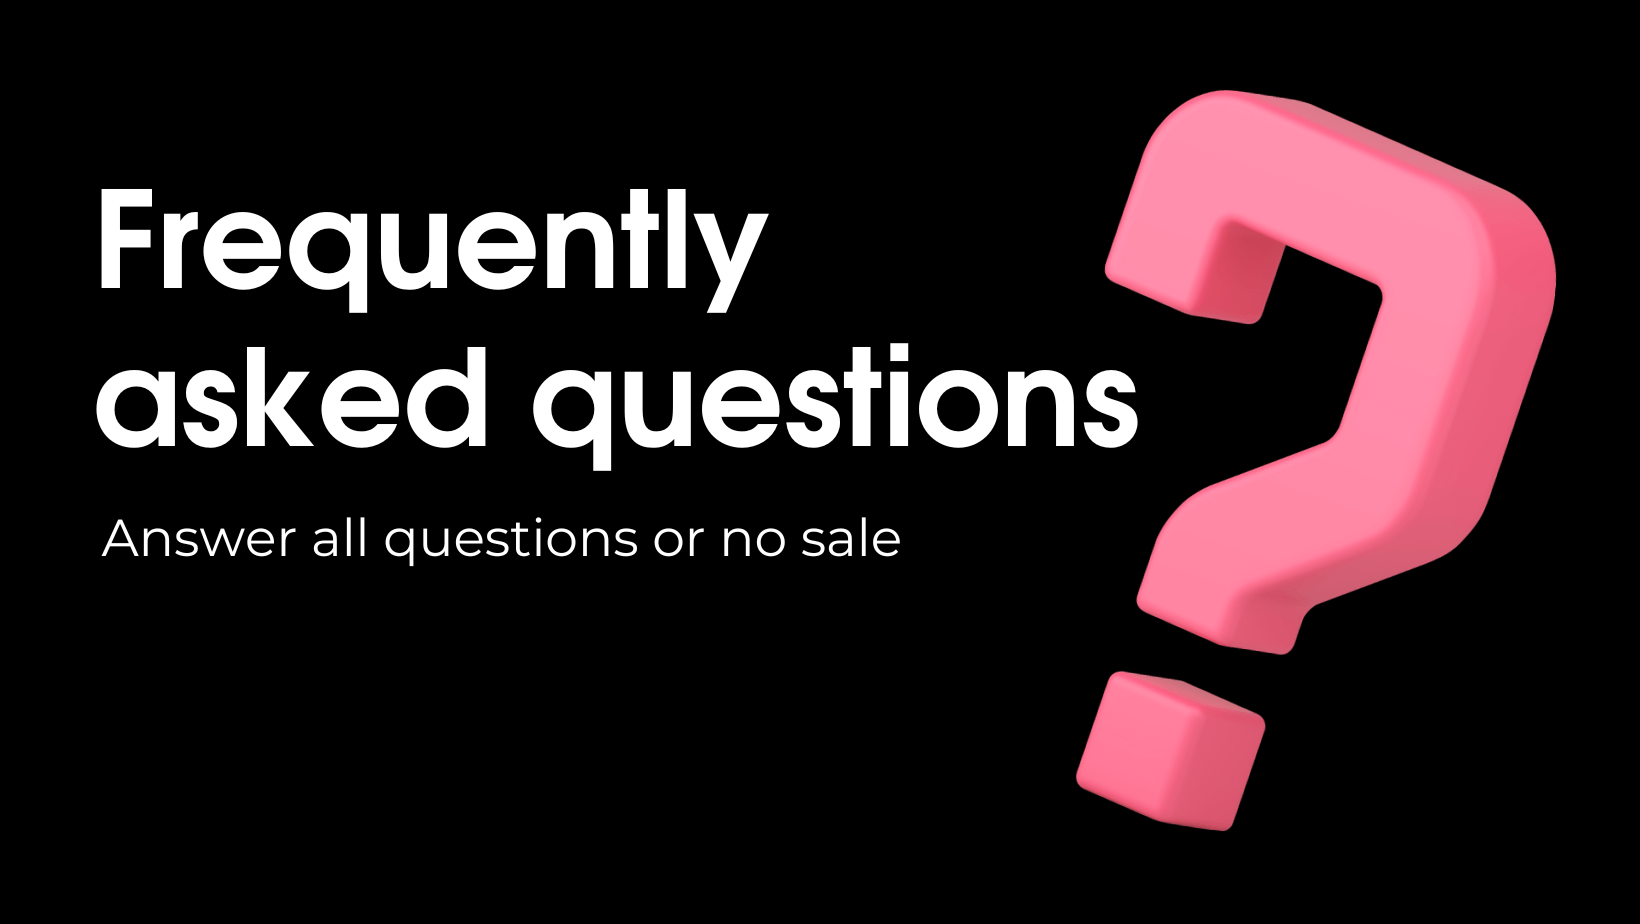 Flip'n awesome explain importancy of faq section on website